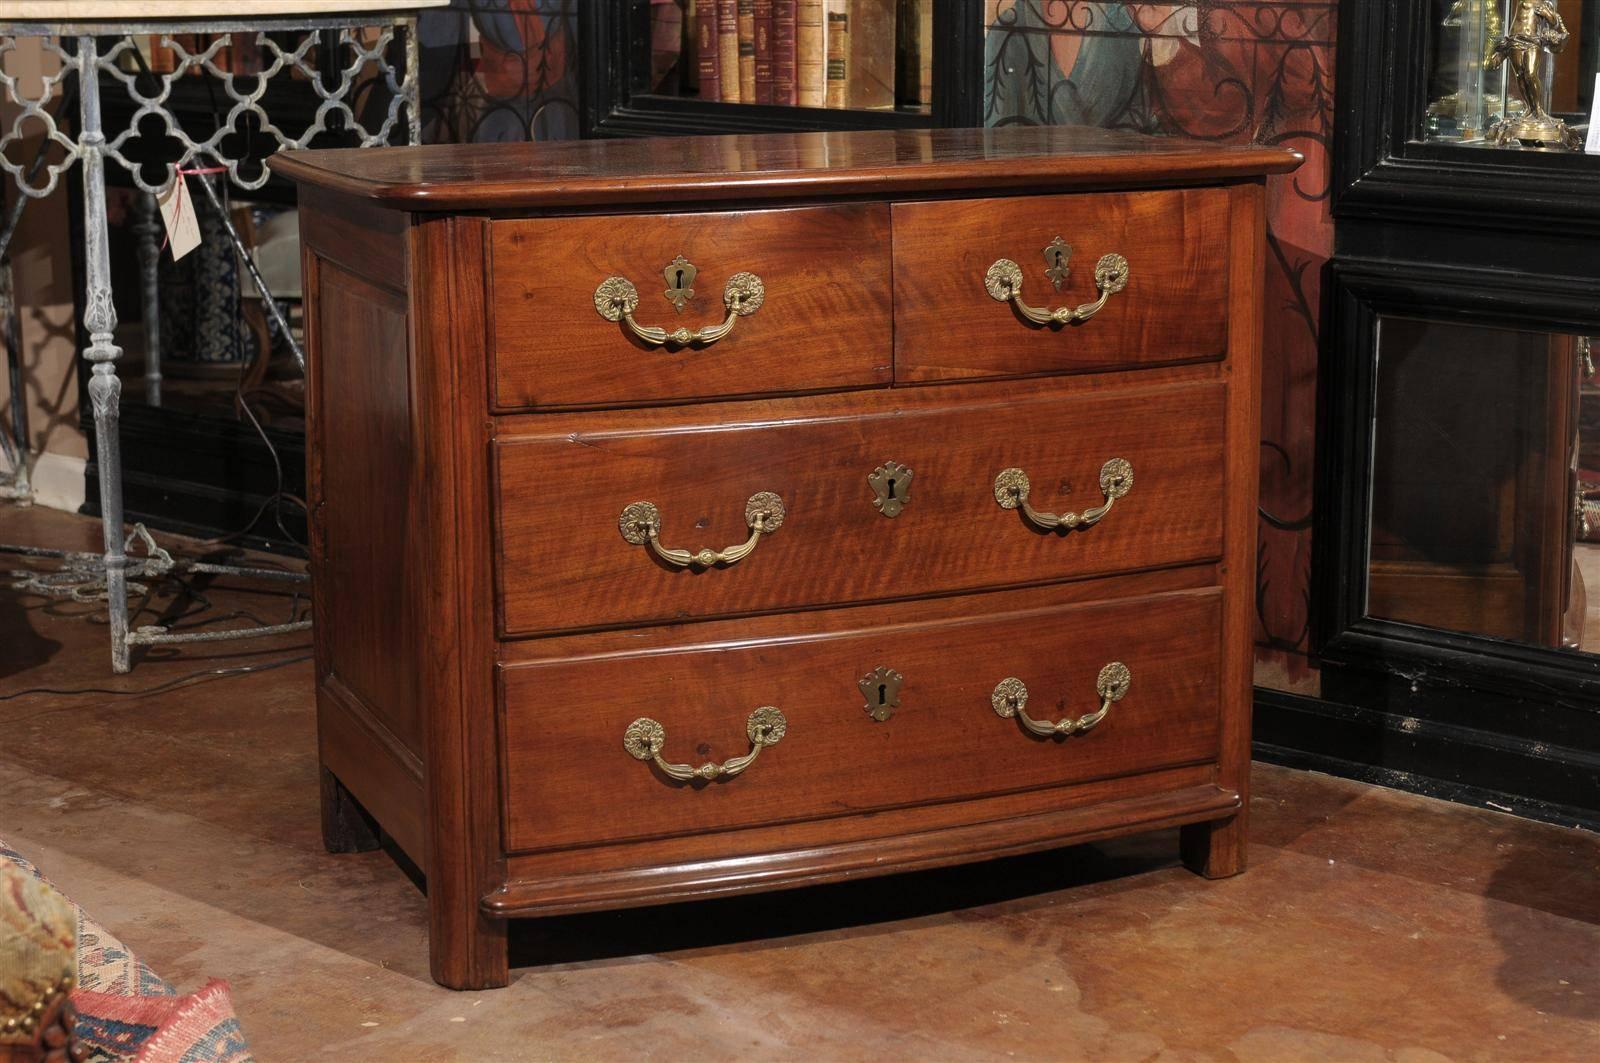 A beautiful handcrafted chest of drawers (late 1700's) with wooden pegs visible on the top. 
Molded edge and slightly bow front case with configuration of drawers on molded feet. All original bronze hardware and escutcheons with original keys.